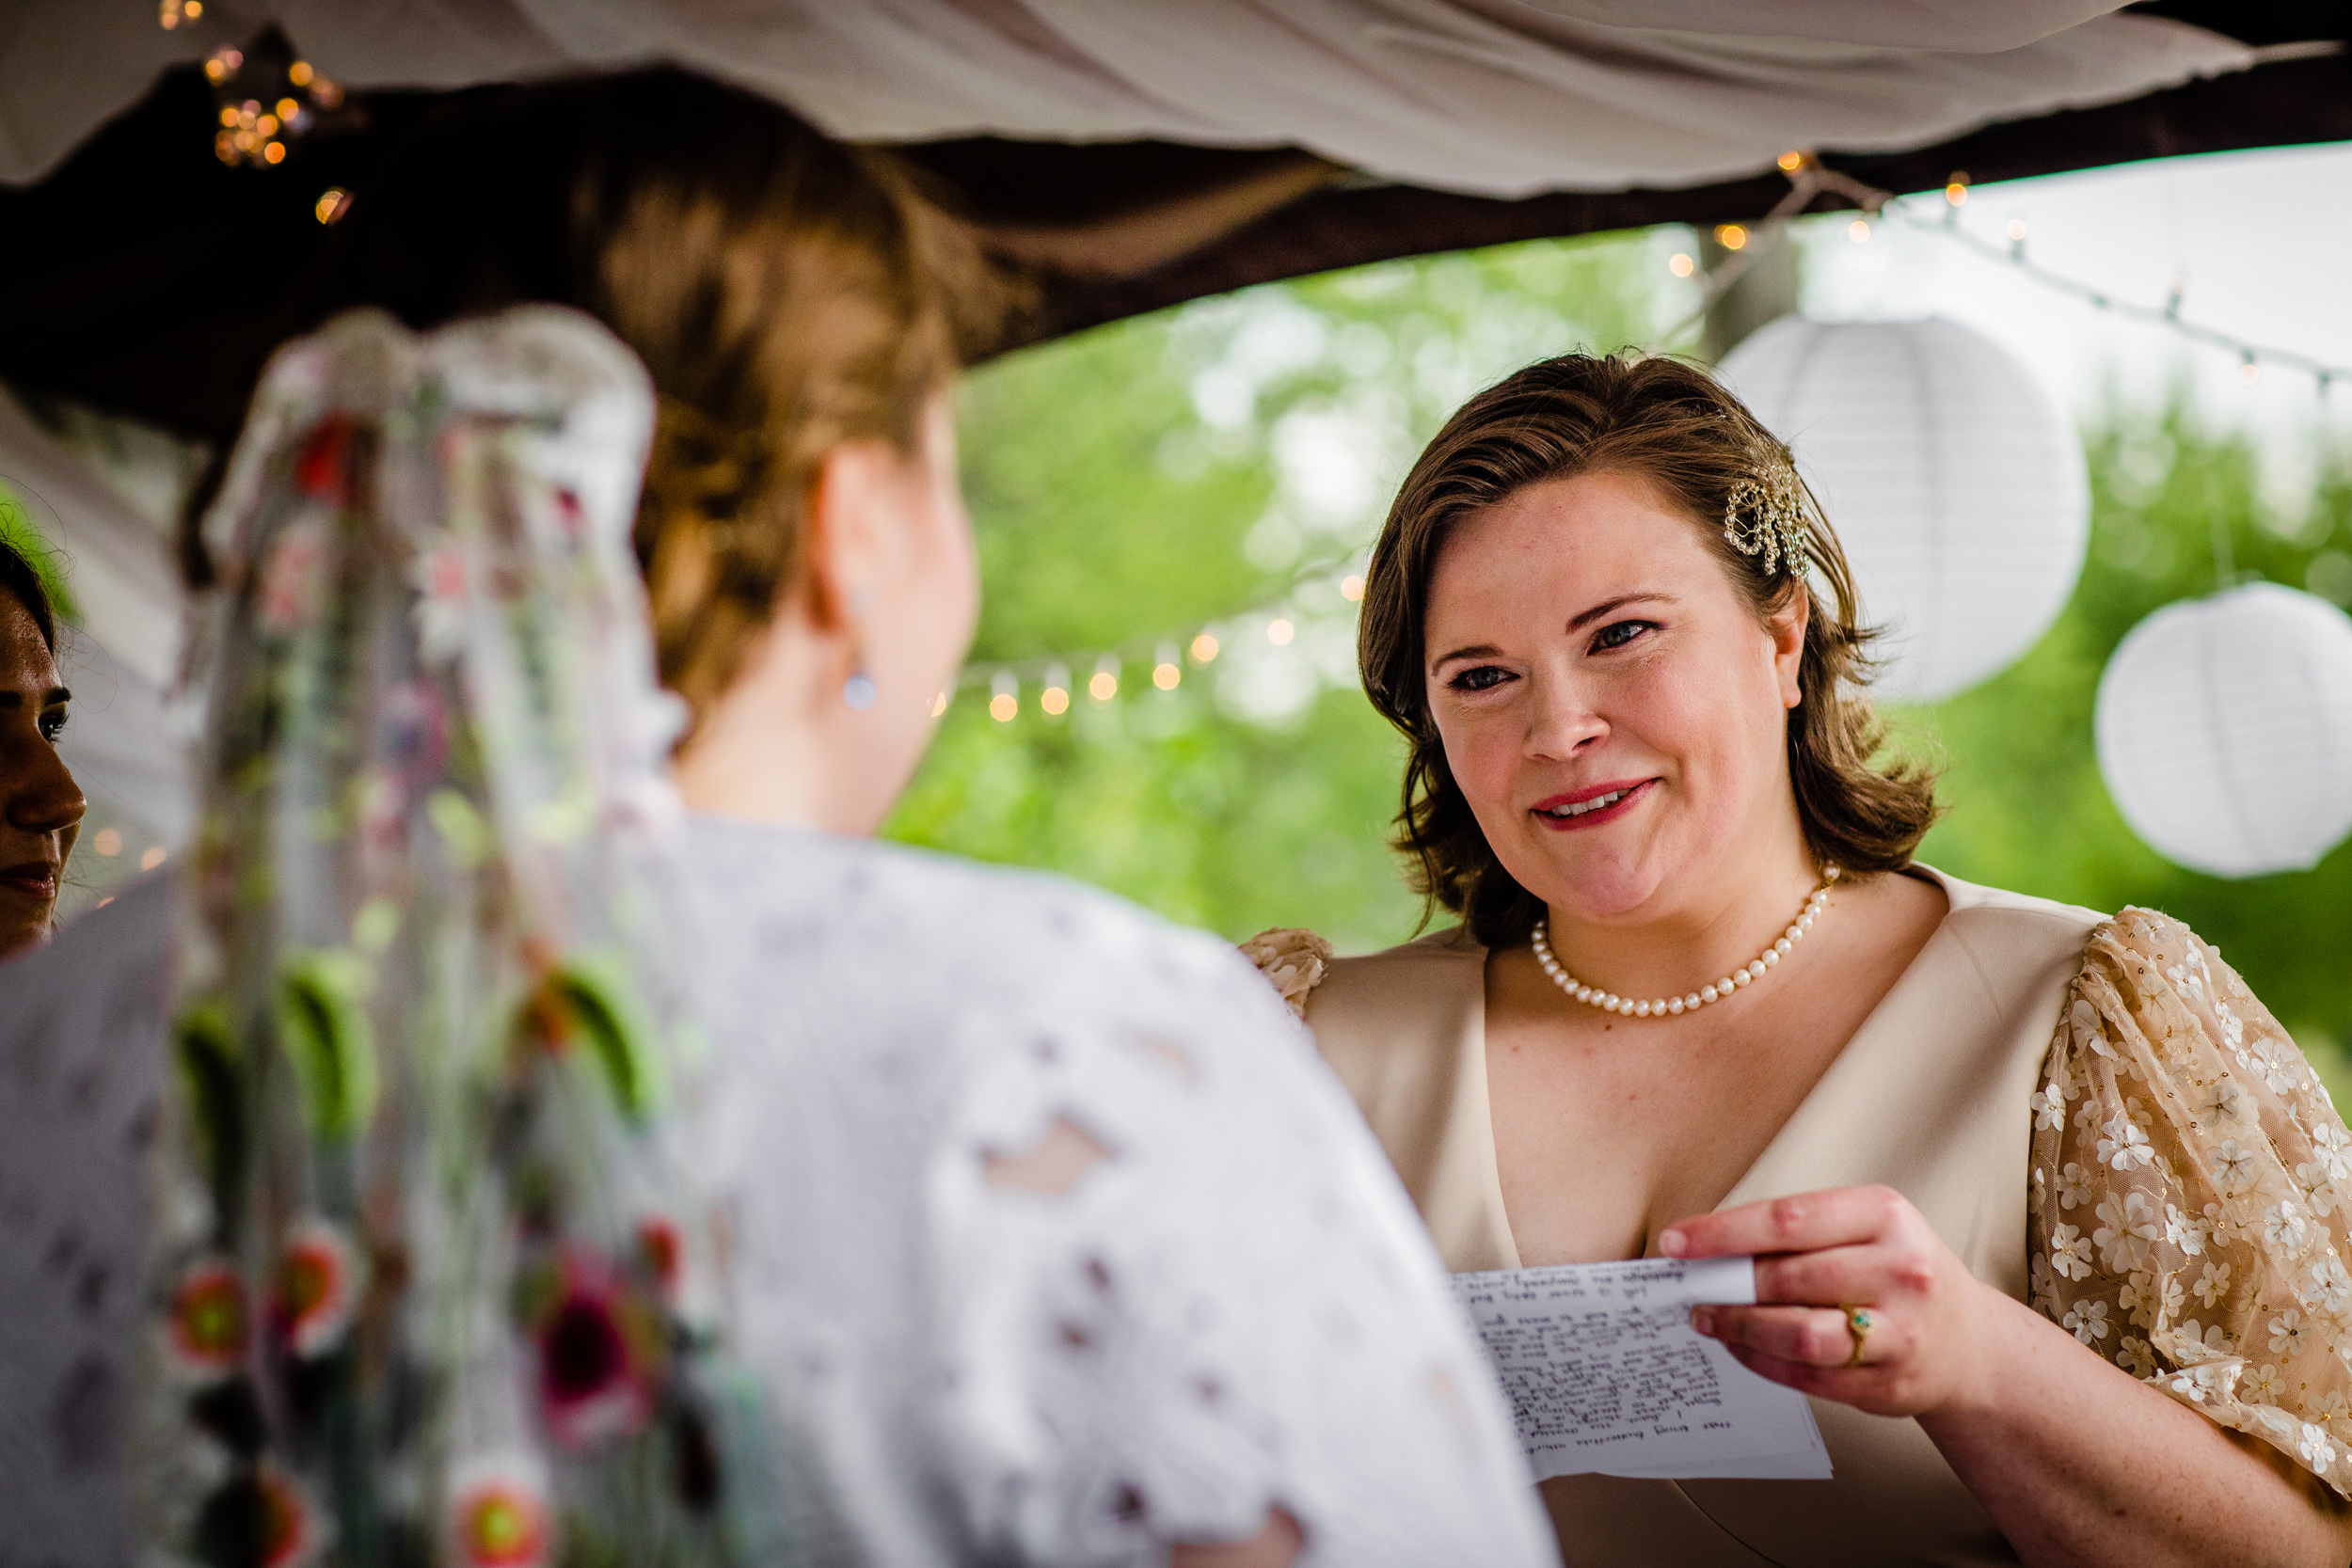 A bride shares her vows during a backyard wedding in New Lenox, Illinois.